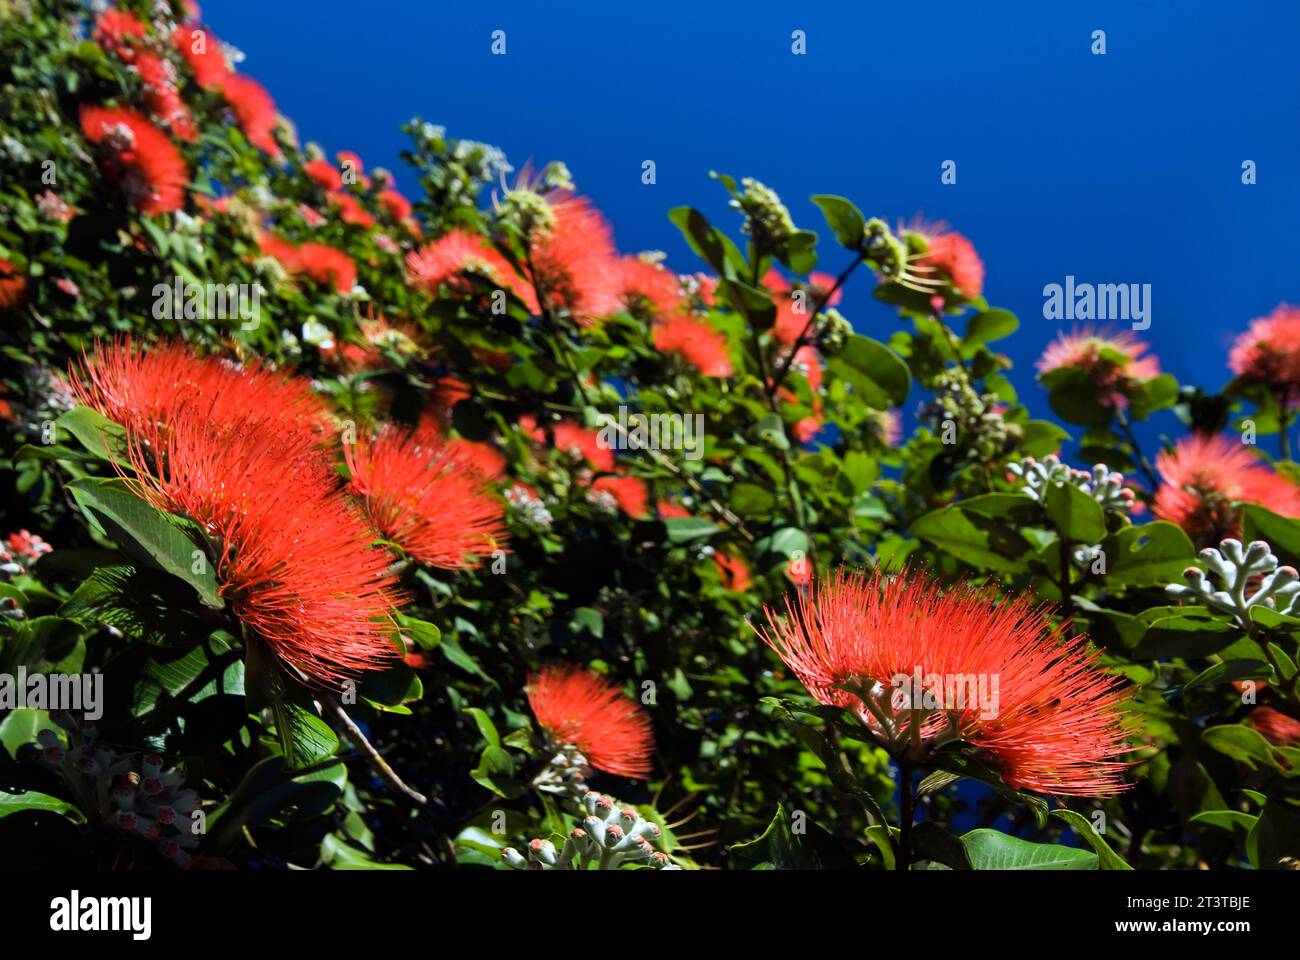 Close up view of pohutukawa flower in bloom against blue sky Stock Photo